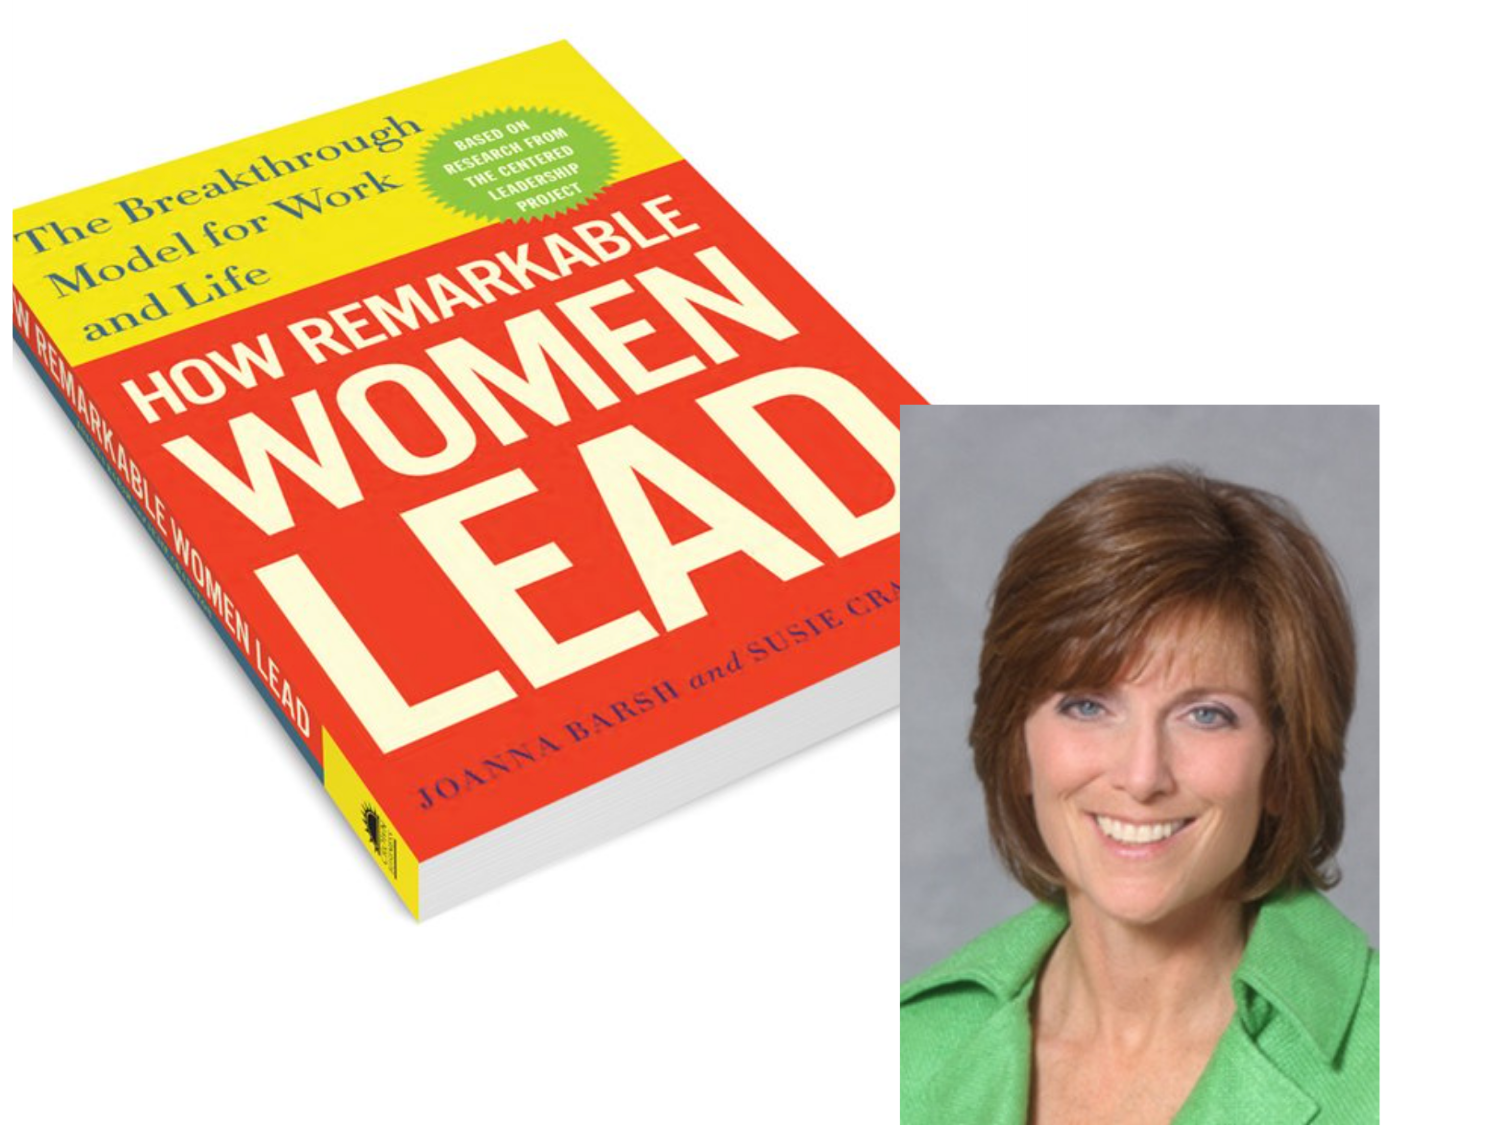 How DO remarkable women lead? Session 4 